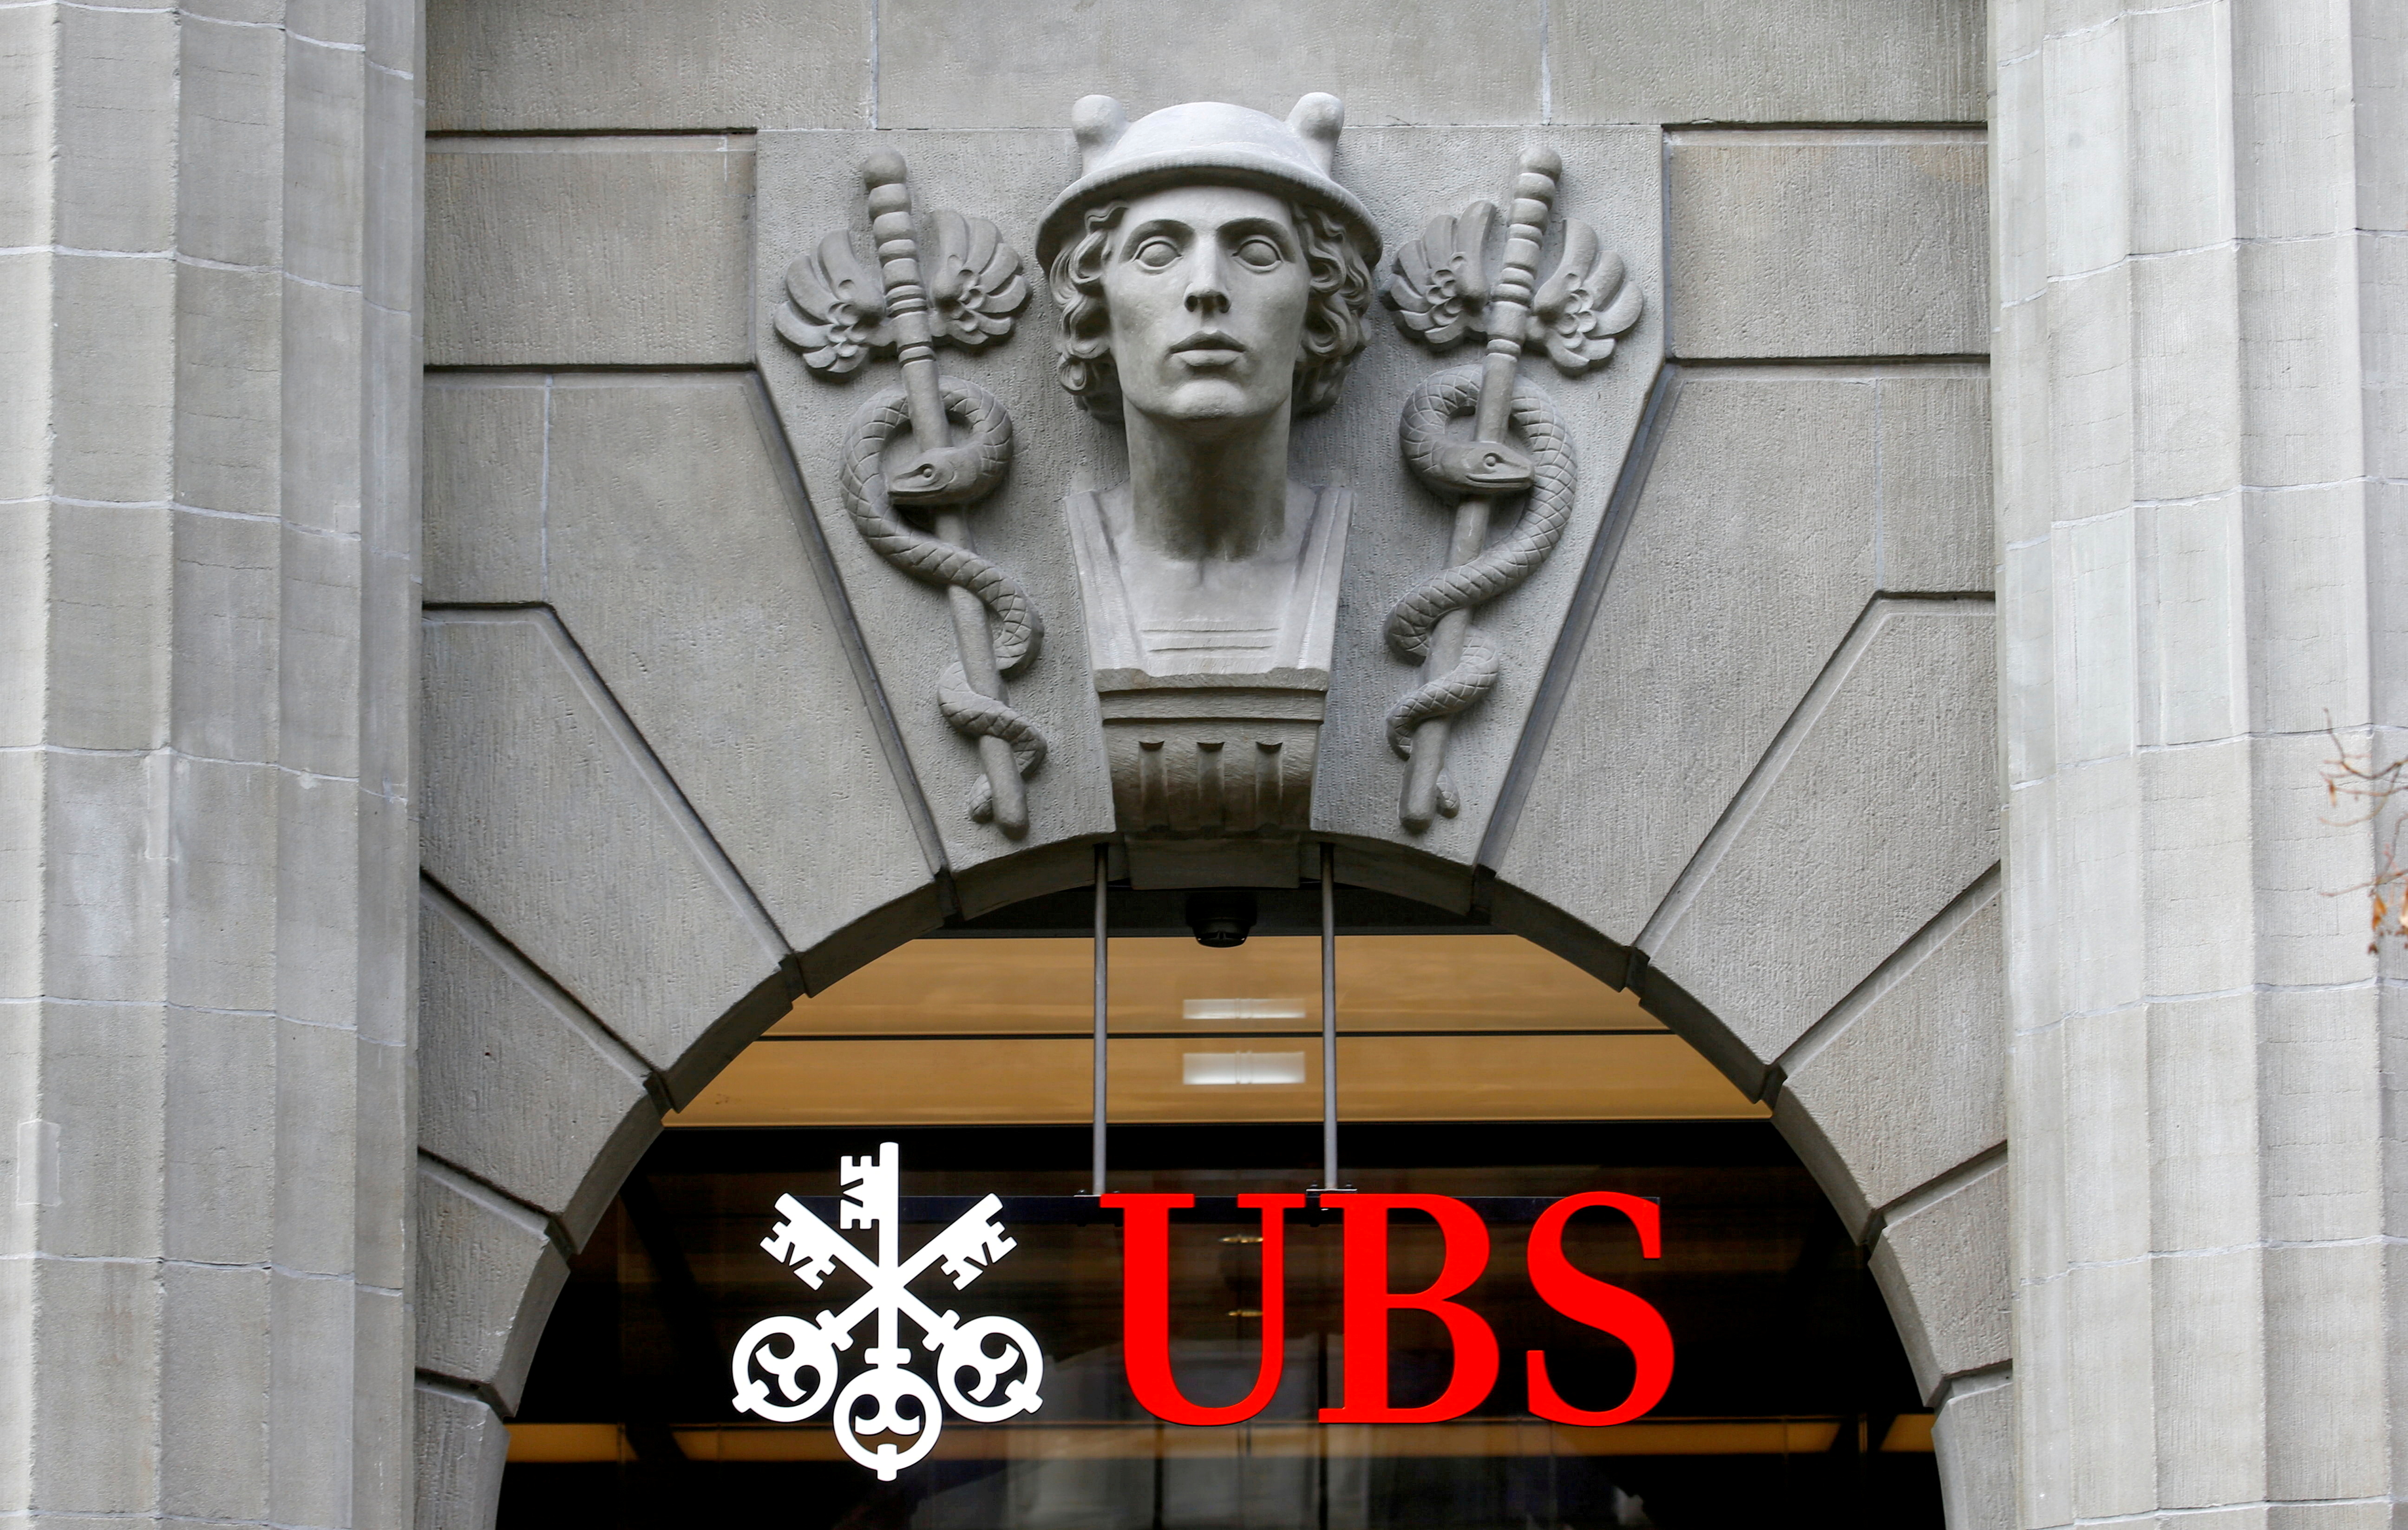 The logo of Swiss bank UBS is seen at its headquarters in Zurich, Switzerland February 17, 2021. REUTERS/Arnd Wiegmann//File Photo